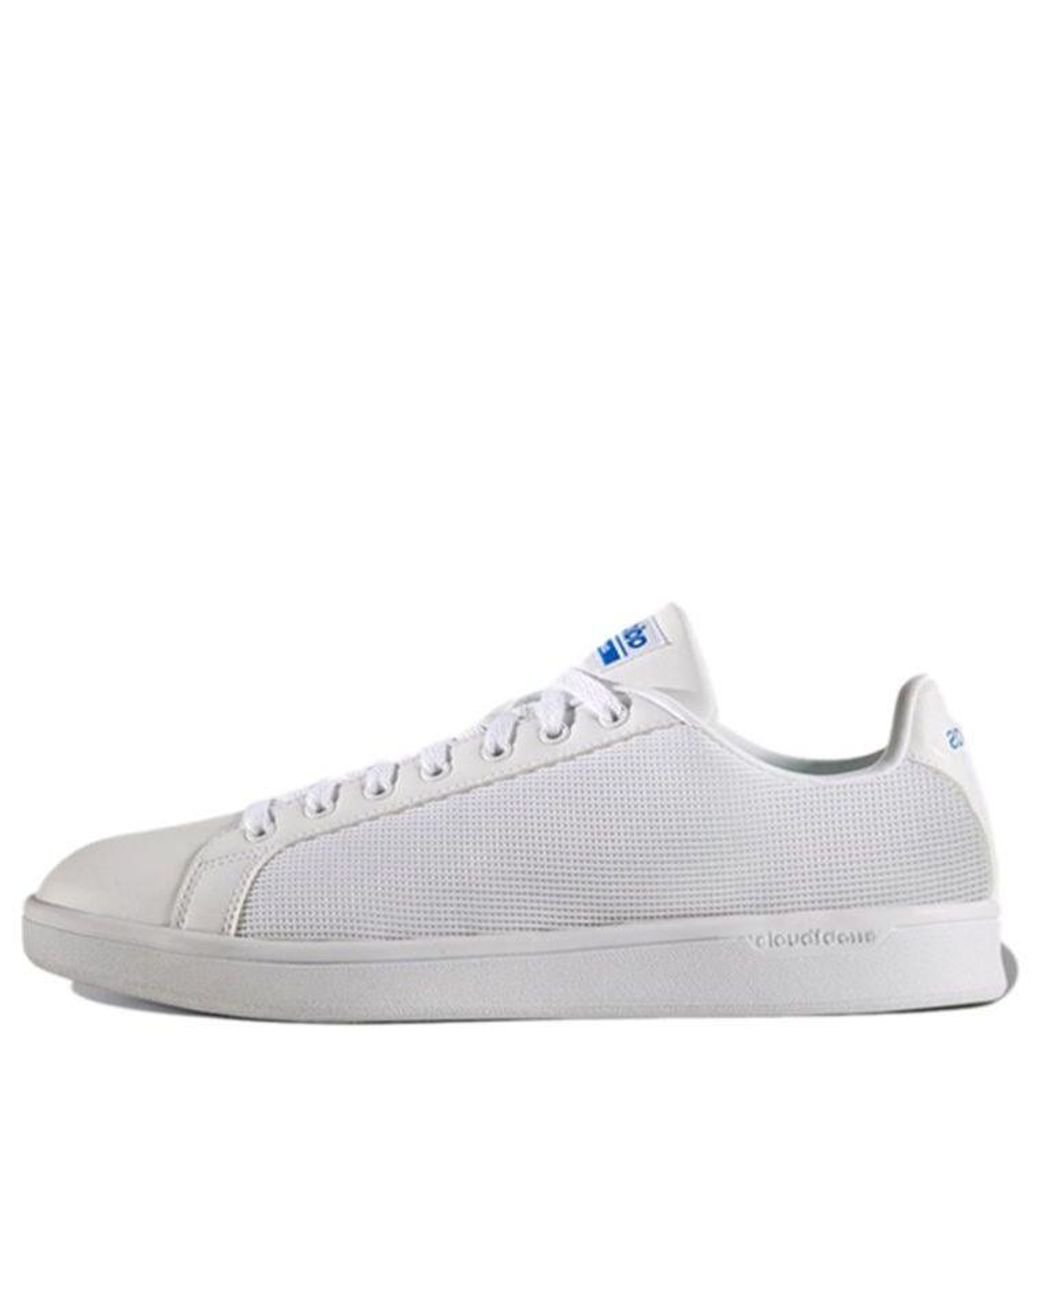 Adidas Neo Cf Advantage Cl Sneakers/shoes in White for Men Lyst